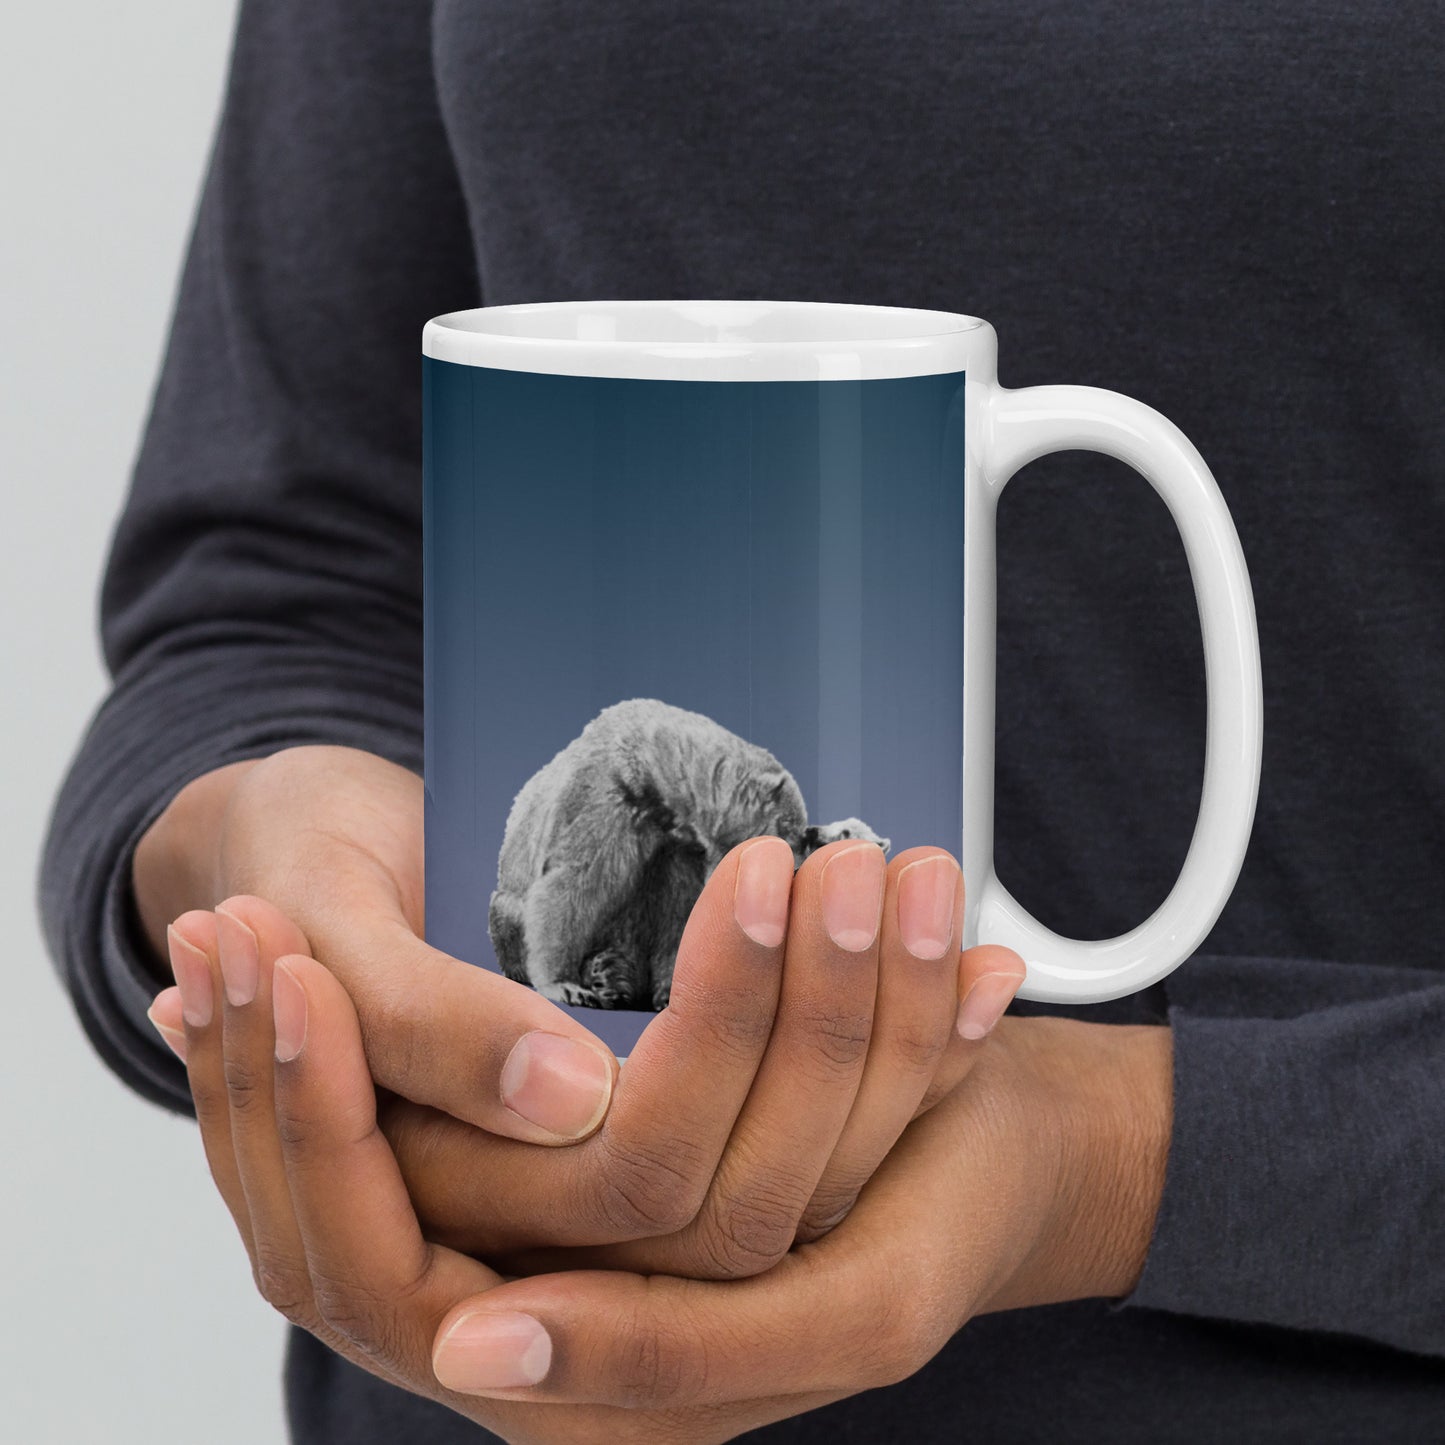 This "Polar Bear White Glossy Mug (B)" is from a drawing of mine created with a graphite pencil. It has been digitally optimized and transferred to a 15oz white glossy mug.